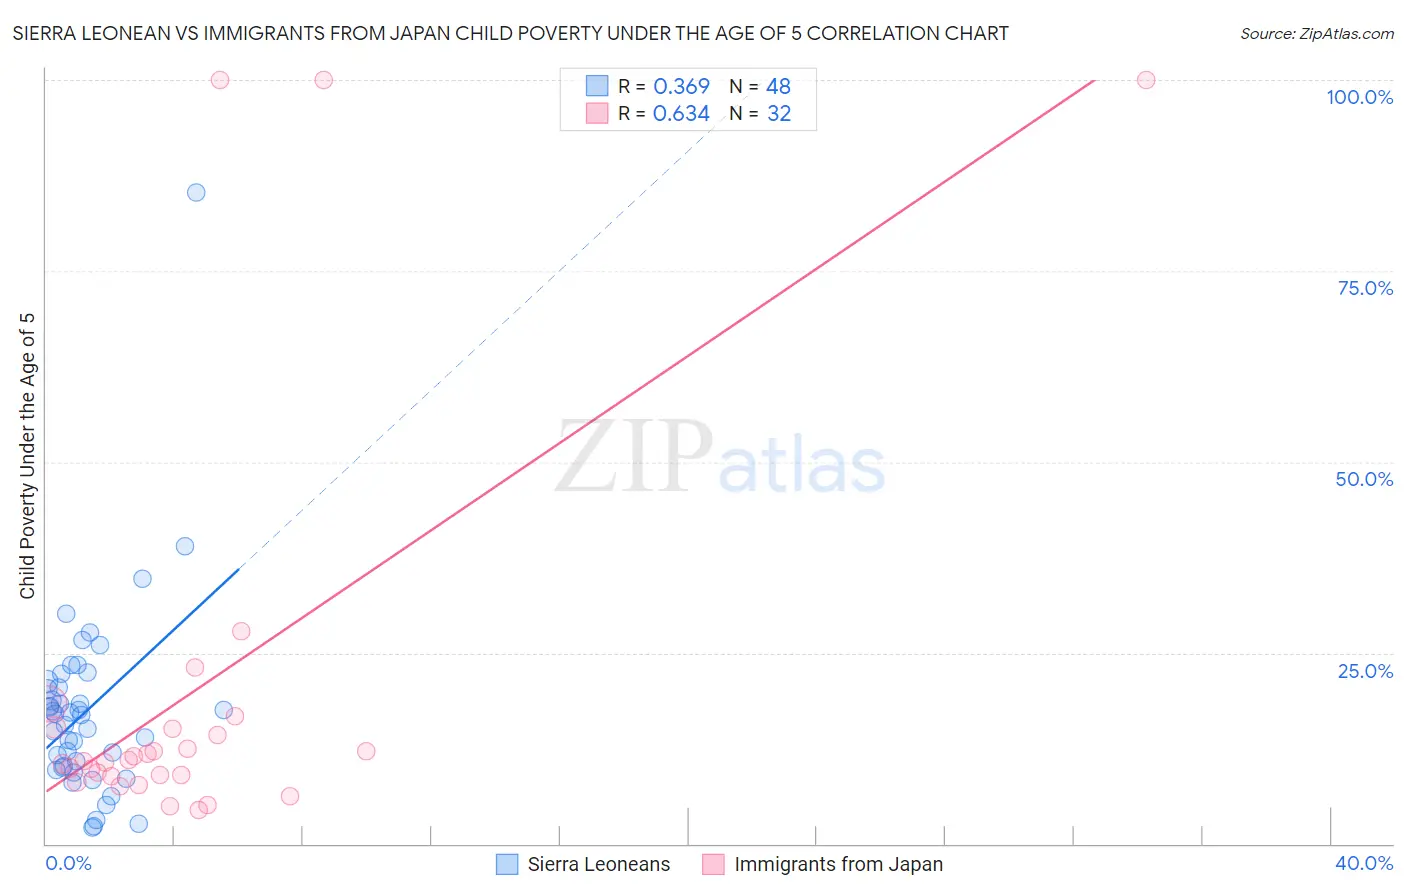 Sierra Leonean vs Immigrants from Japan Child Poverty Under the Age of 5